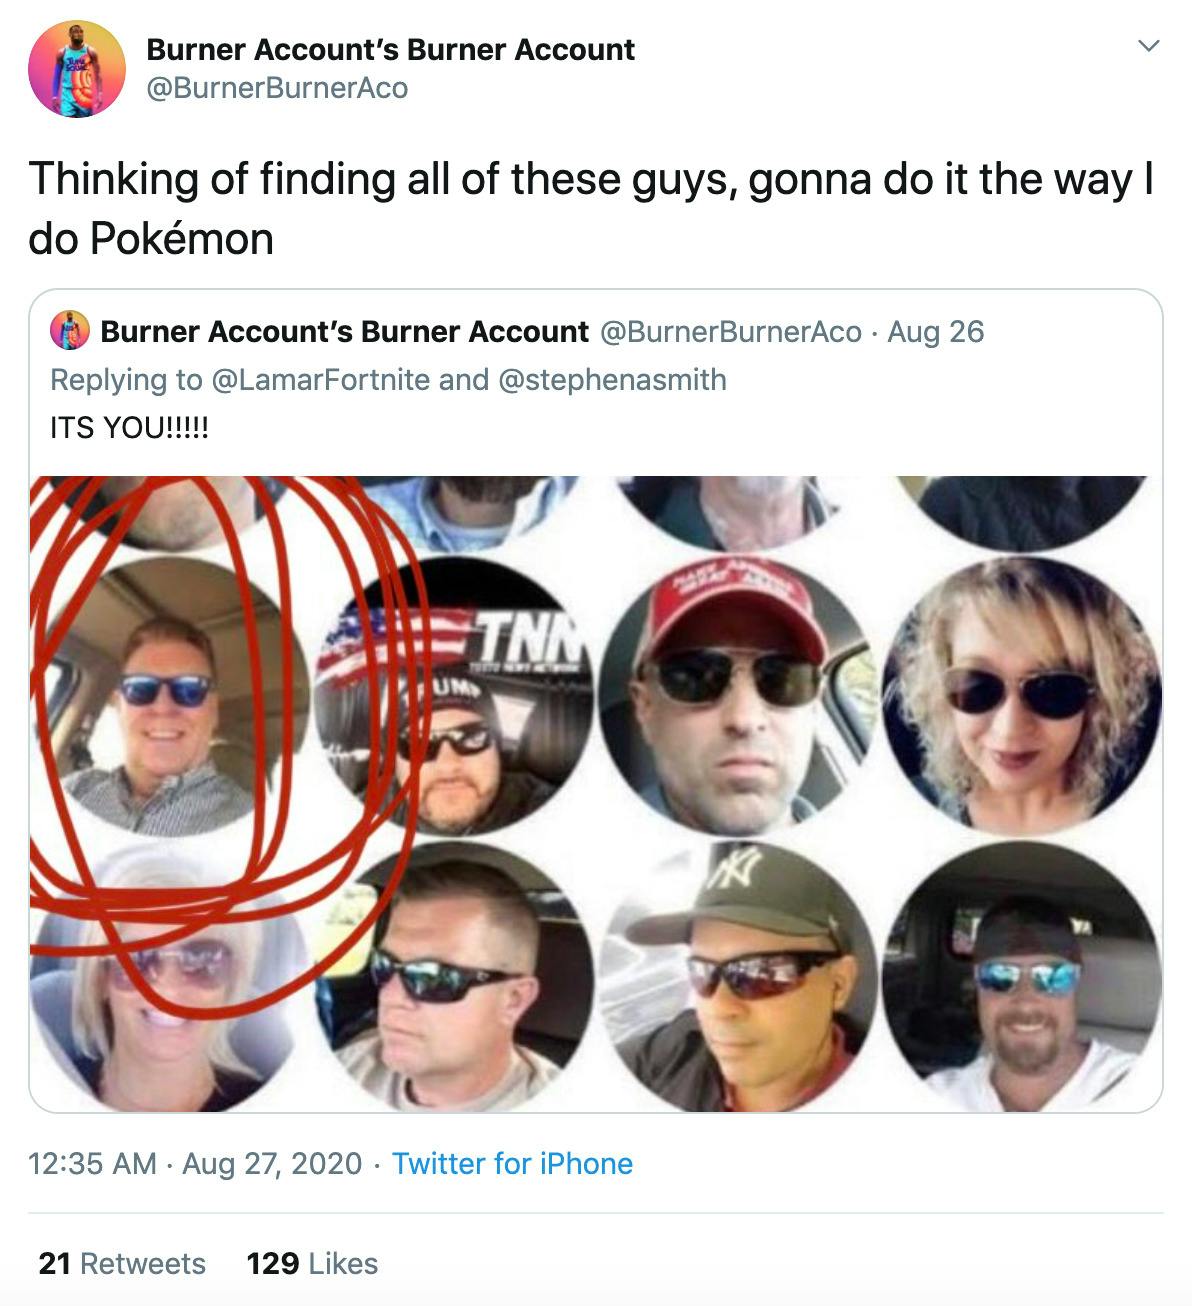 "Thinking of finding all of these guys, gonna do it the way I do Pokémon"